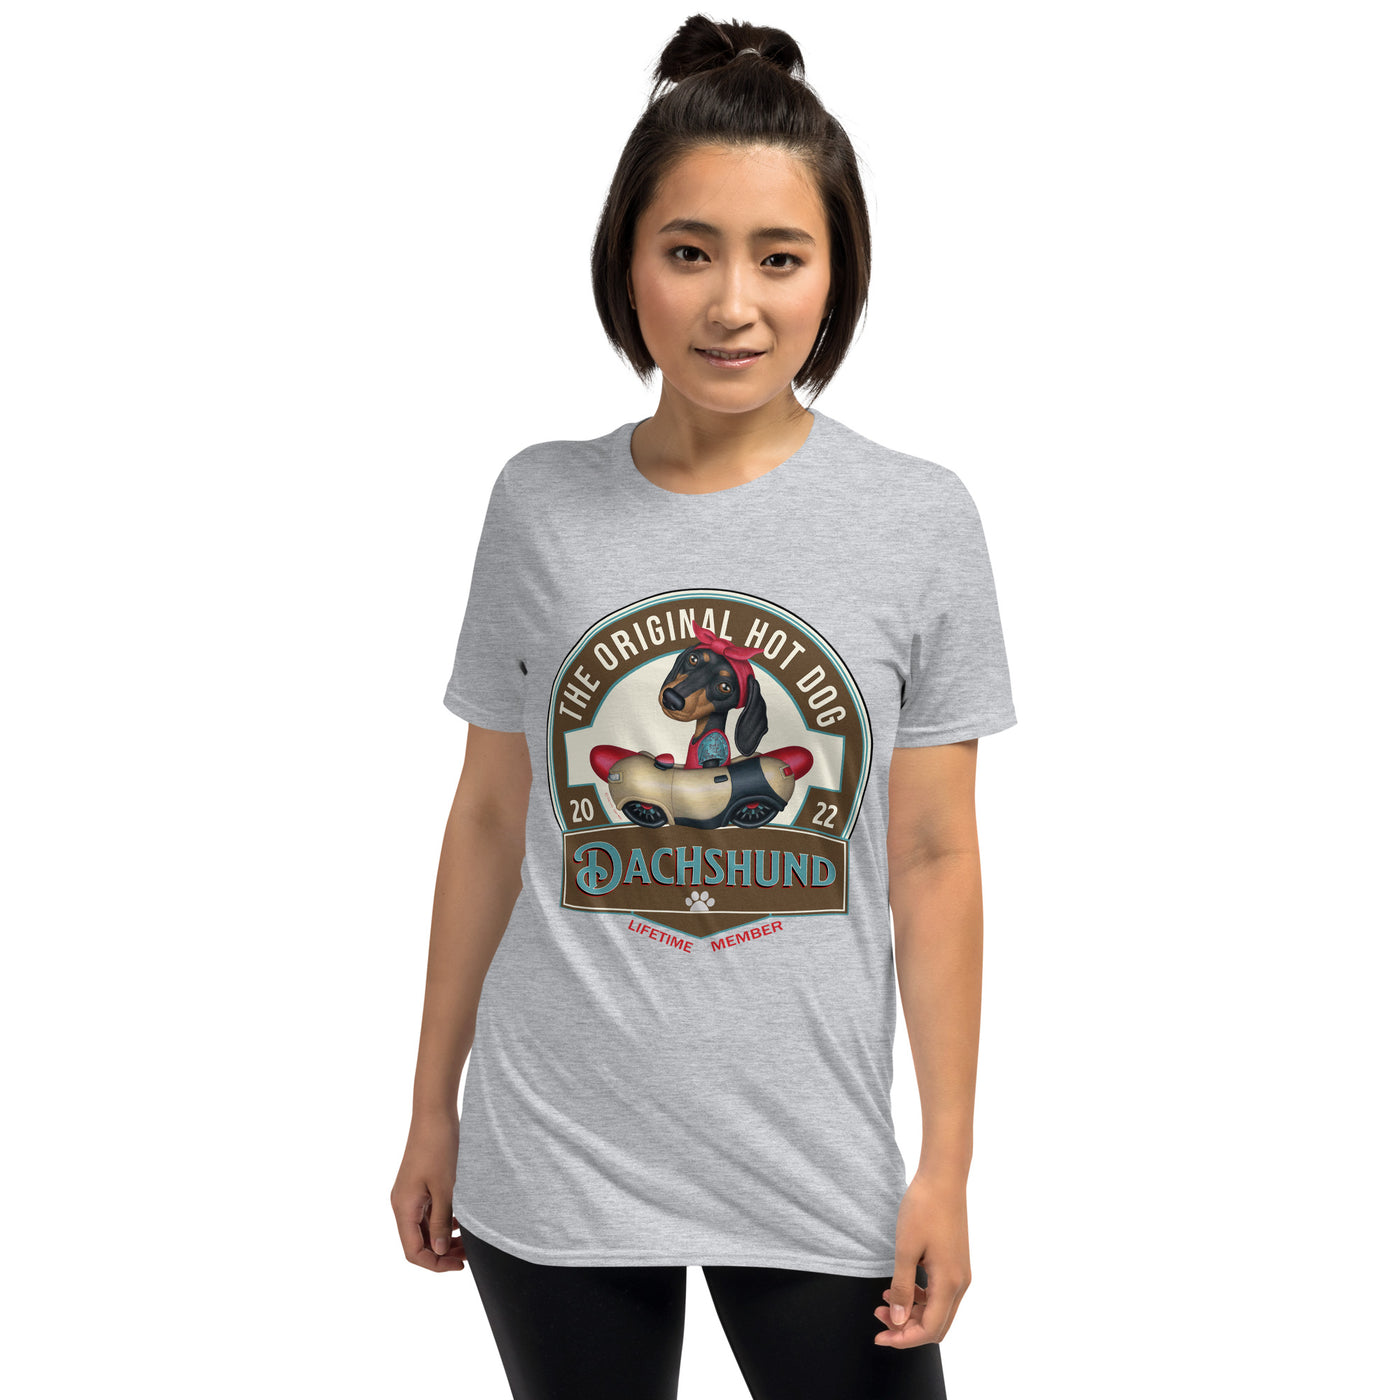 Cute and famous doxie dog driving a retro classic car for shopping on an Original Hot Dog Dachshund Unisex T-Shirt